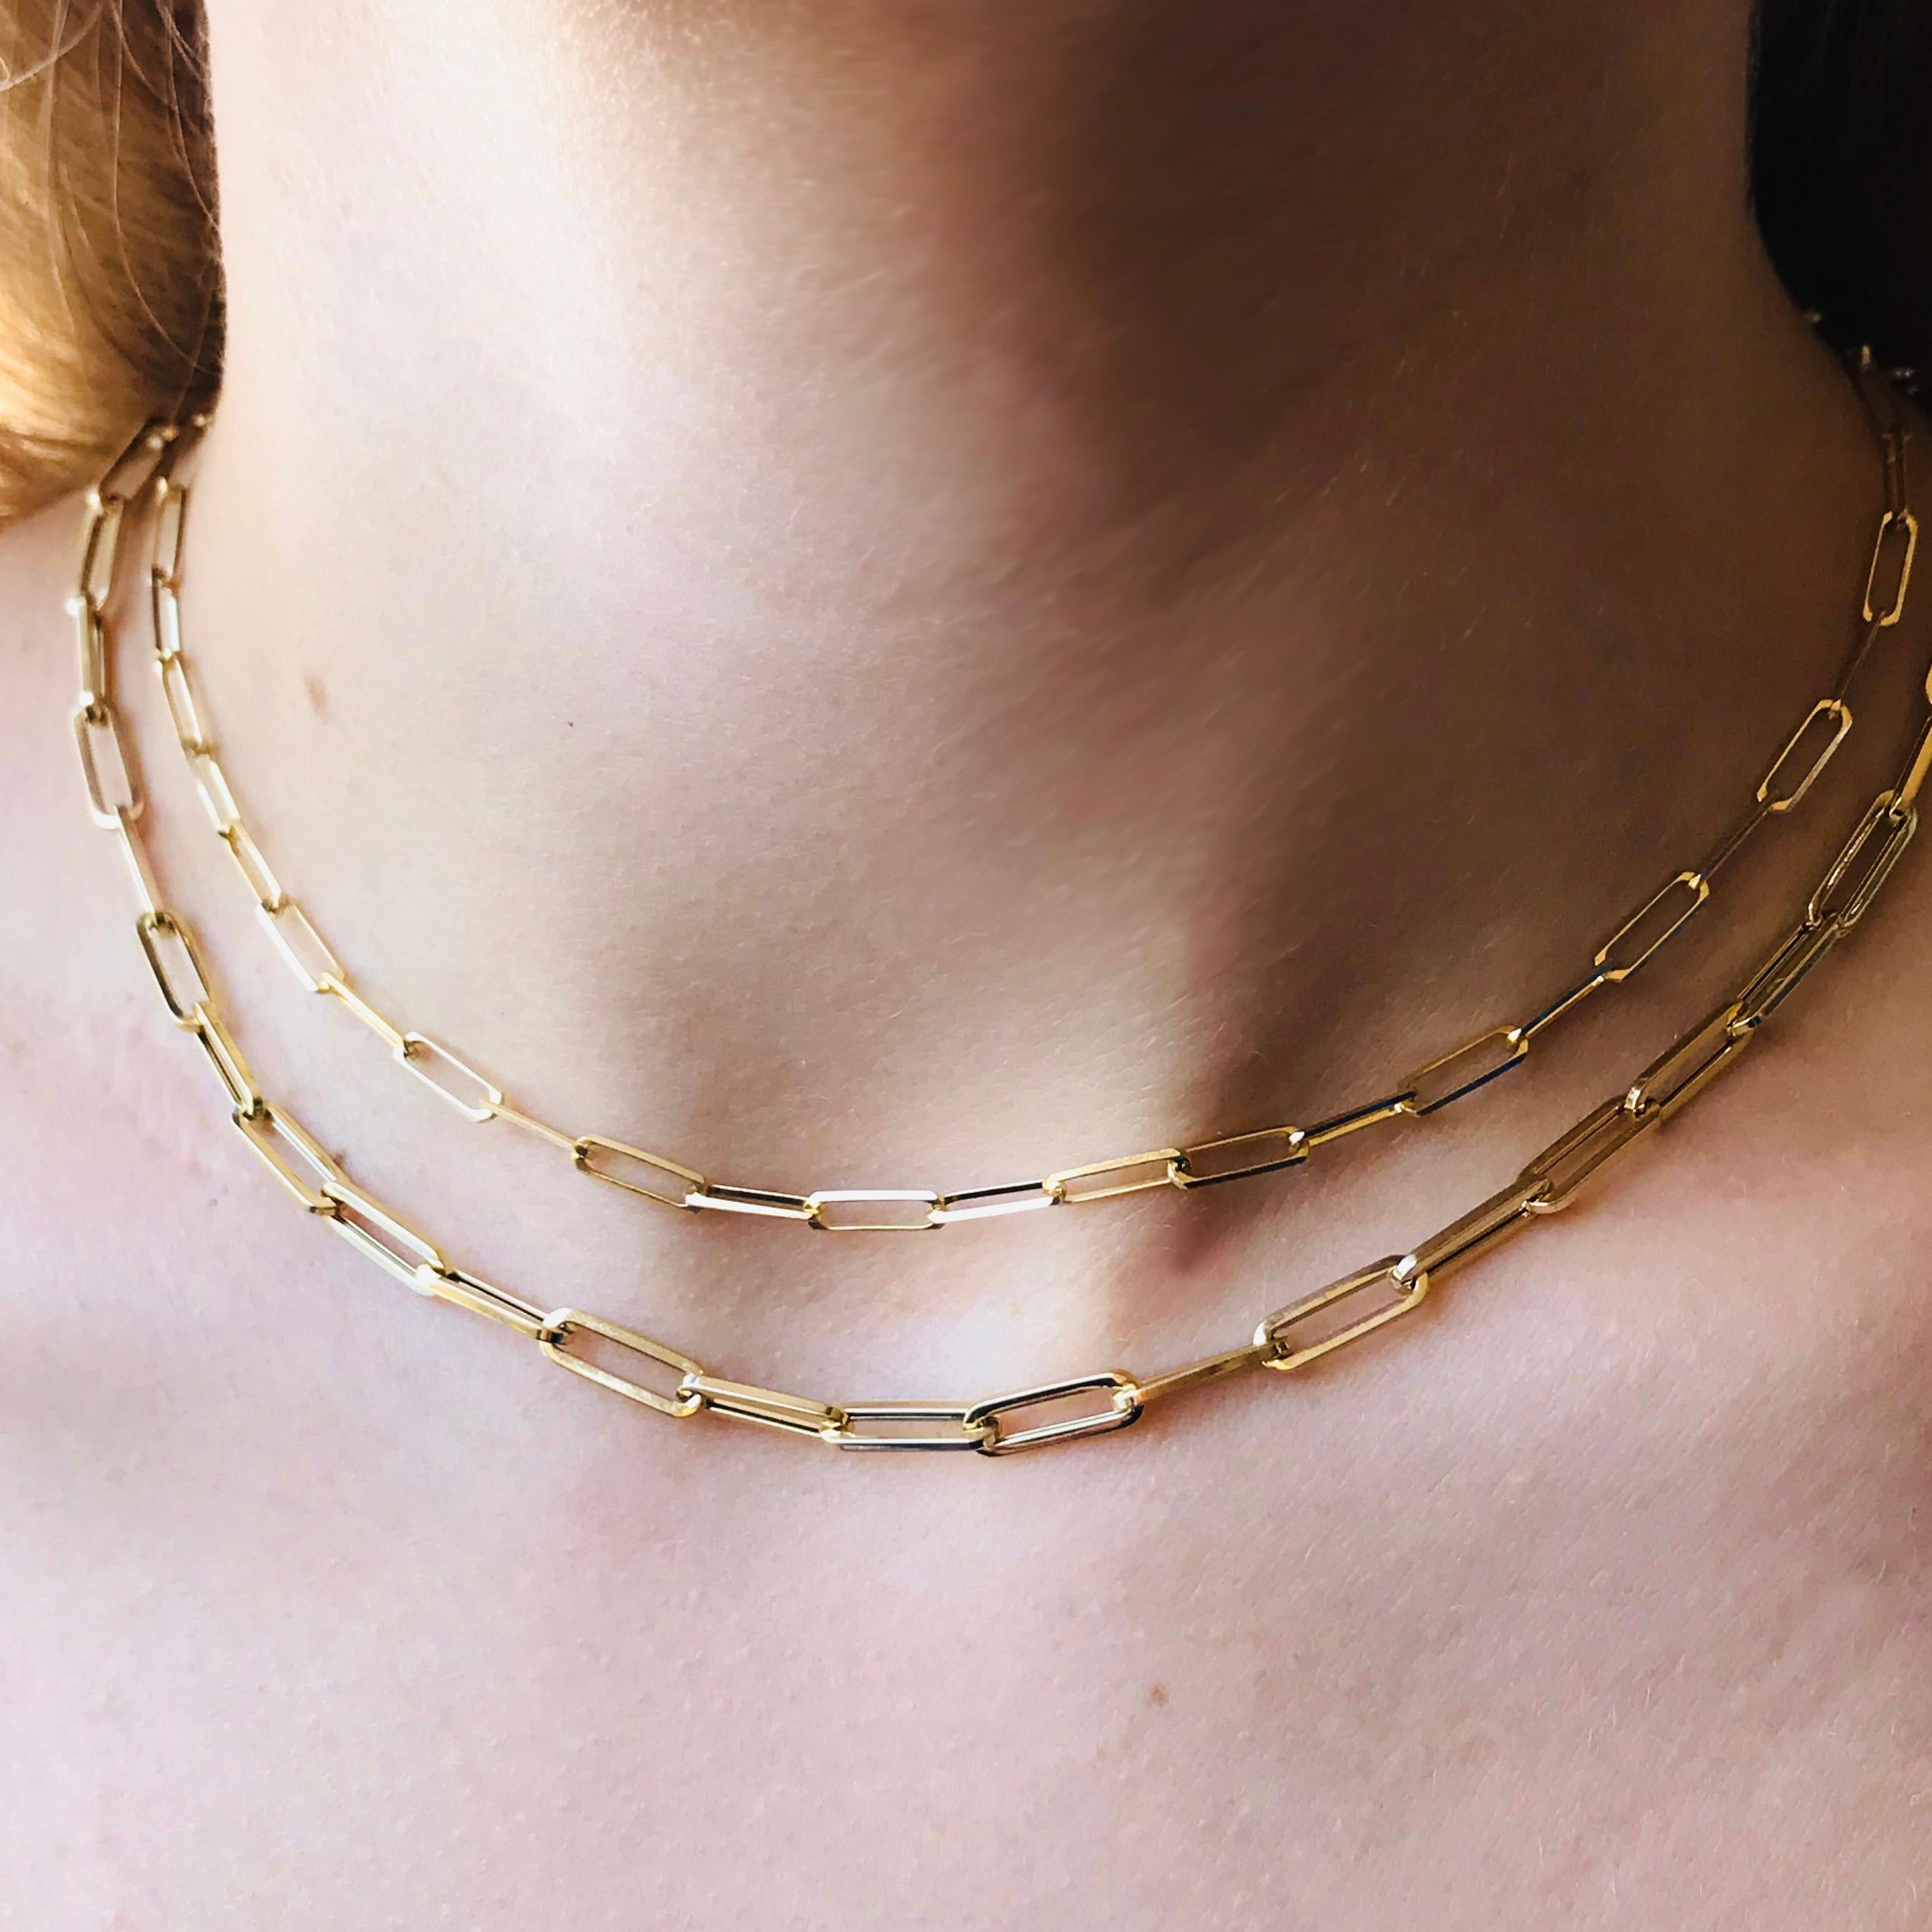 Gold Paperclip Link Chain Necklace in 14 Karat Gold, 14 Karat Gold Paperclip 2